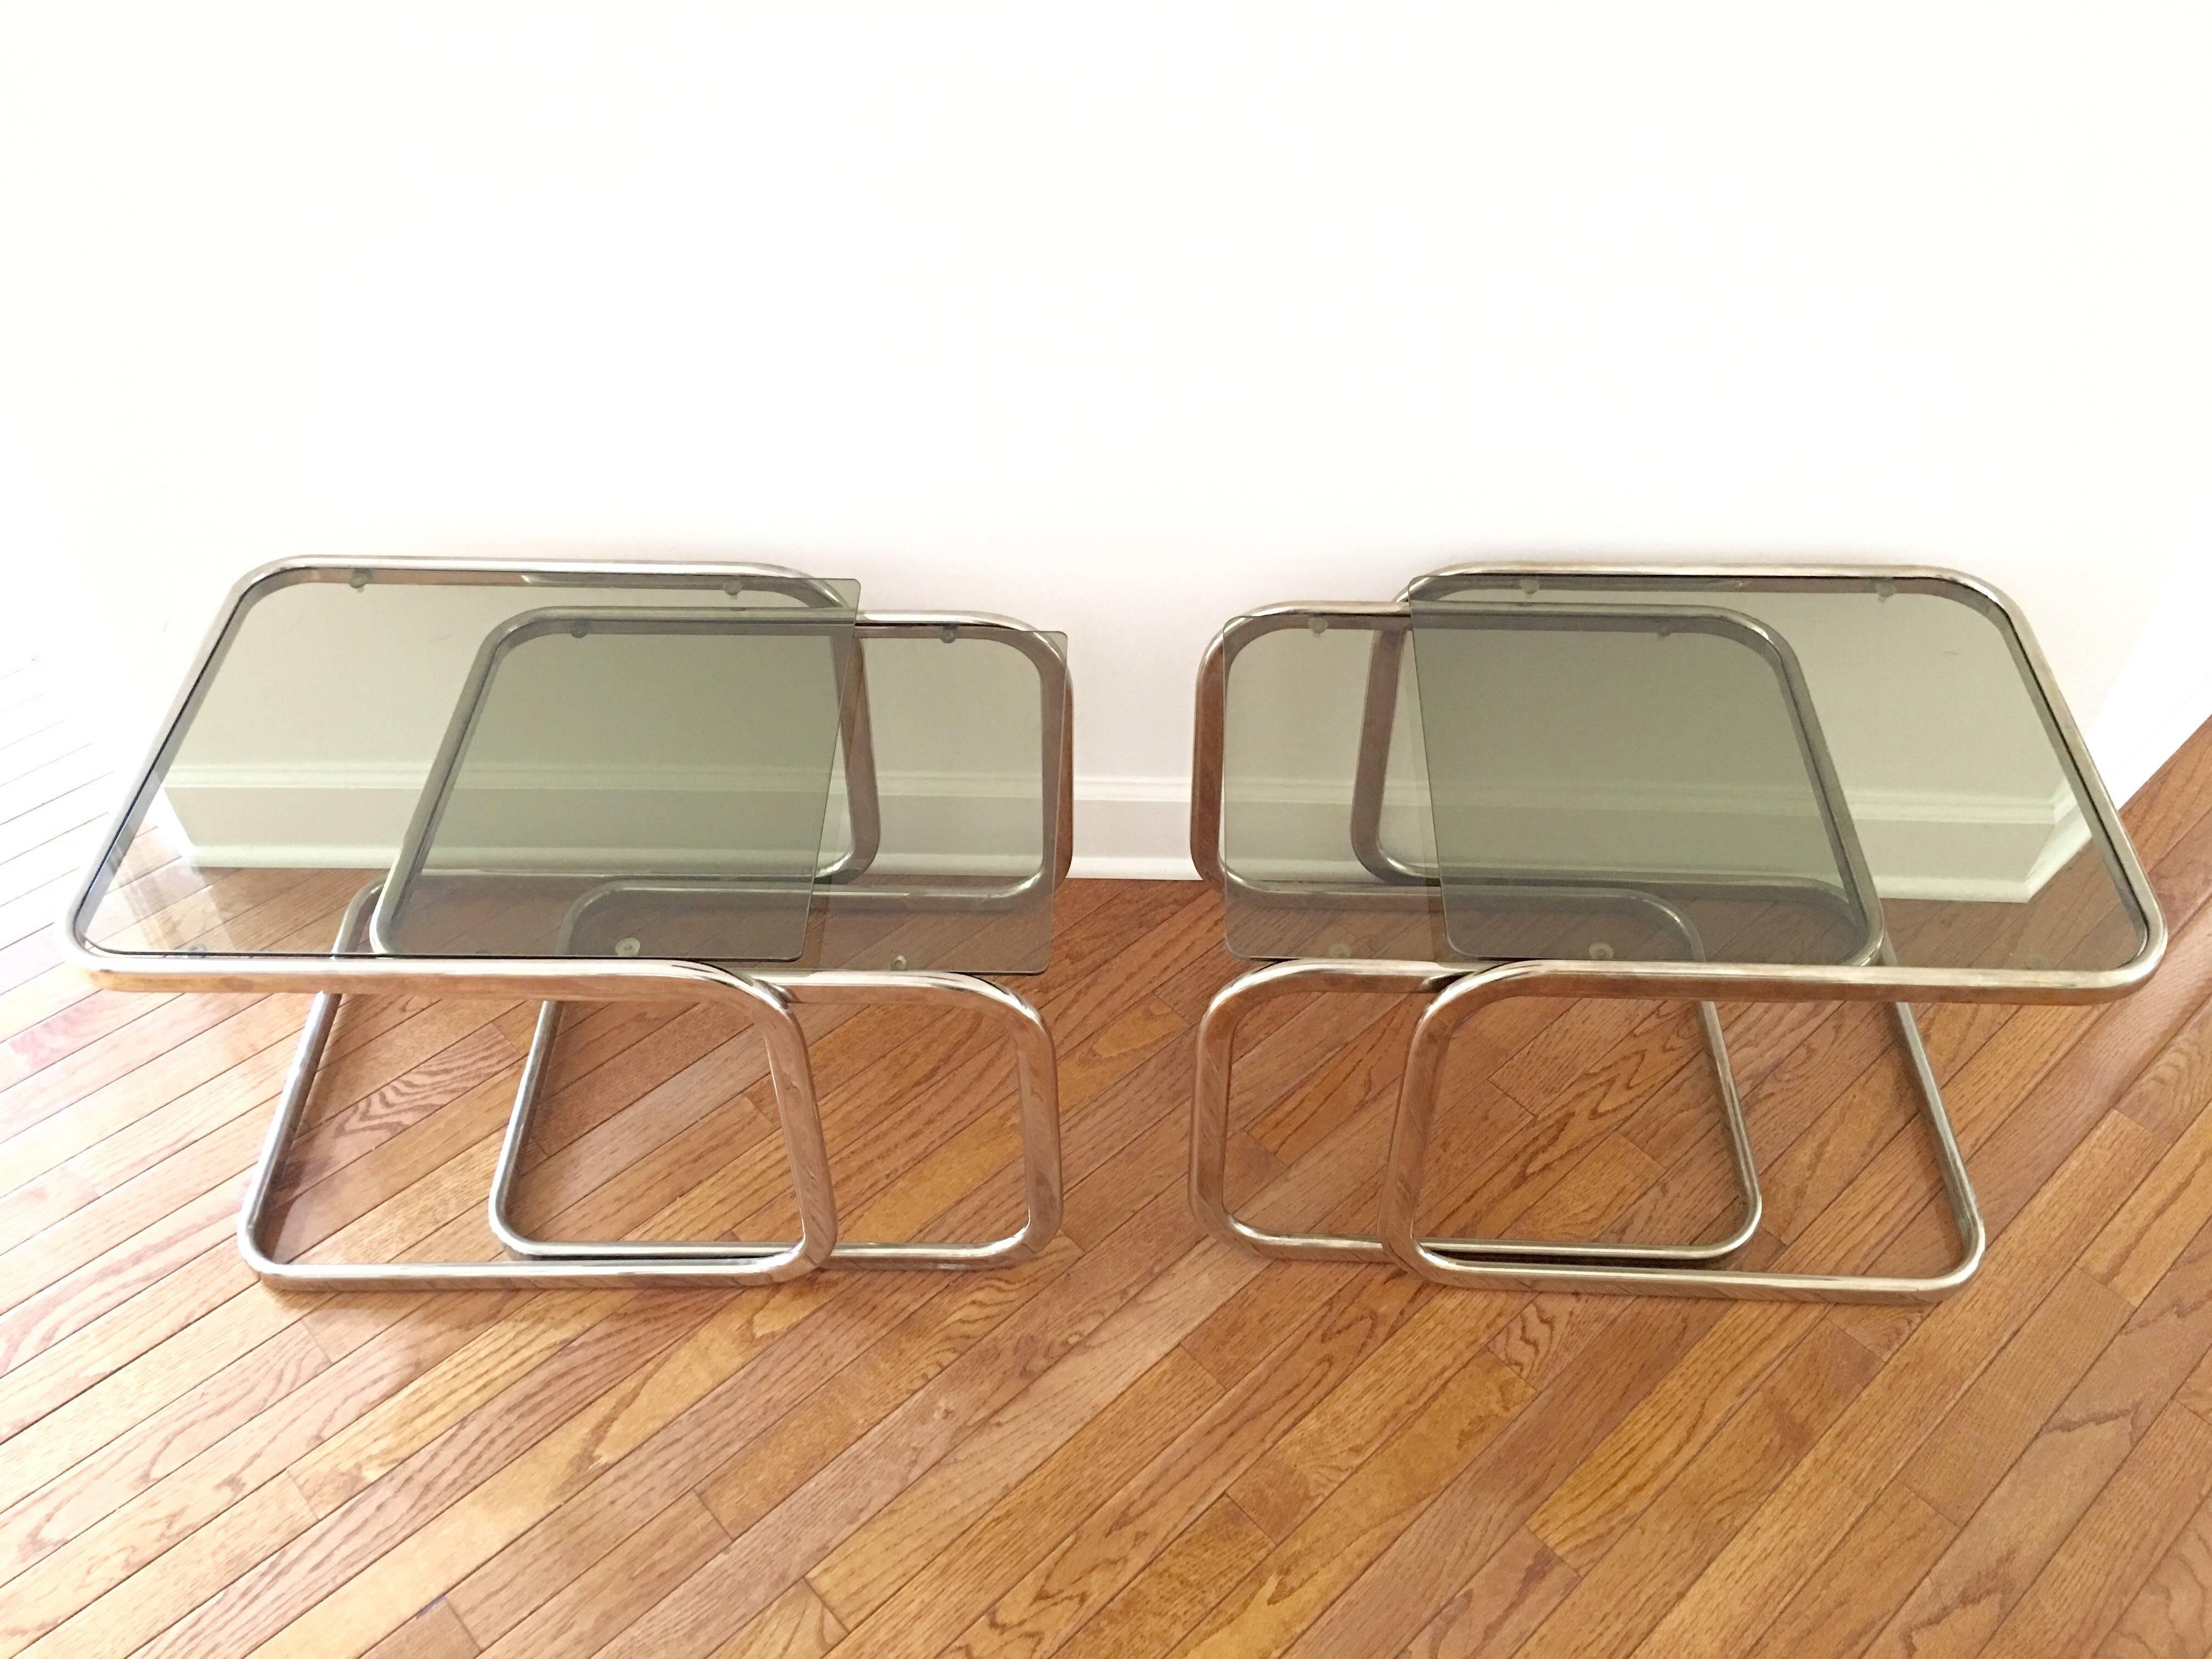 An elegant pair of brass and glass nesting tables with an unmistakable mid-century styling. Each set contains two tables for a total of four. Slight variations in the size of each table as given below.

Dimensions for other three tables:
Table 2: